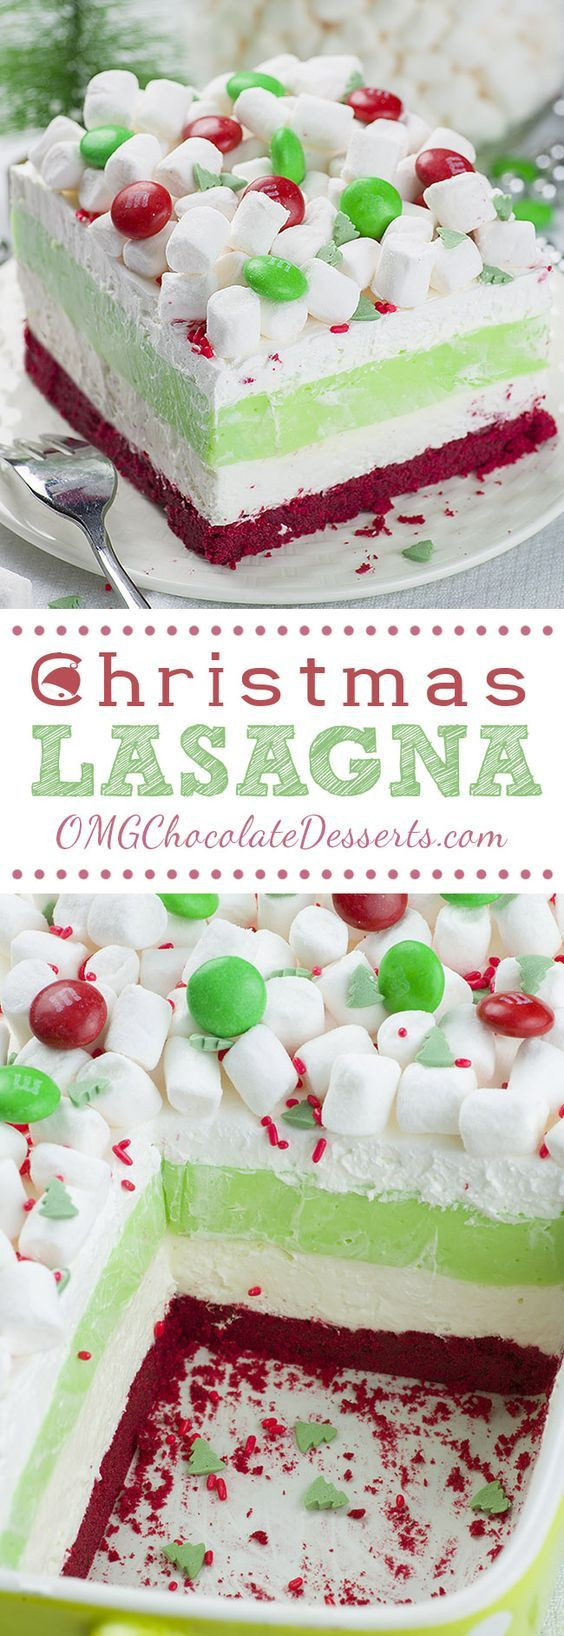 Easy Christmas Desserts Pinterest
 1000 ideas about Christmas Desserts Easy on Pinterest